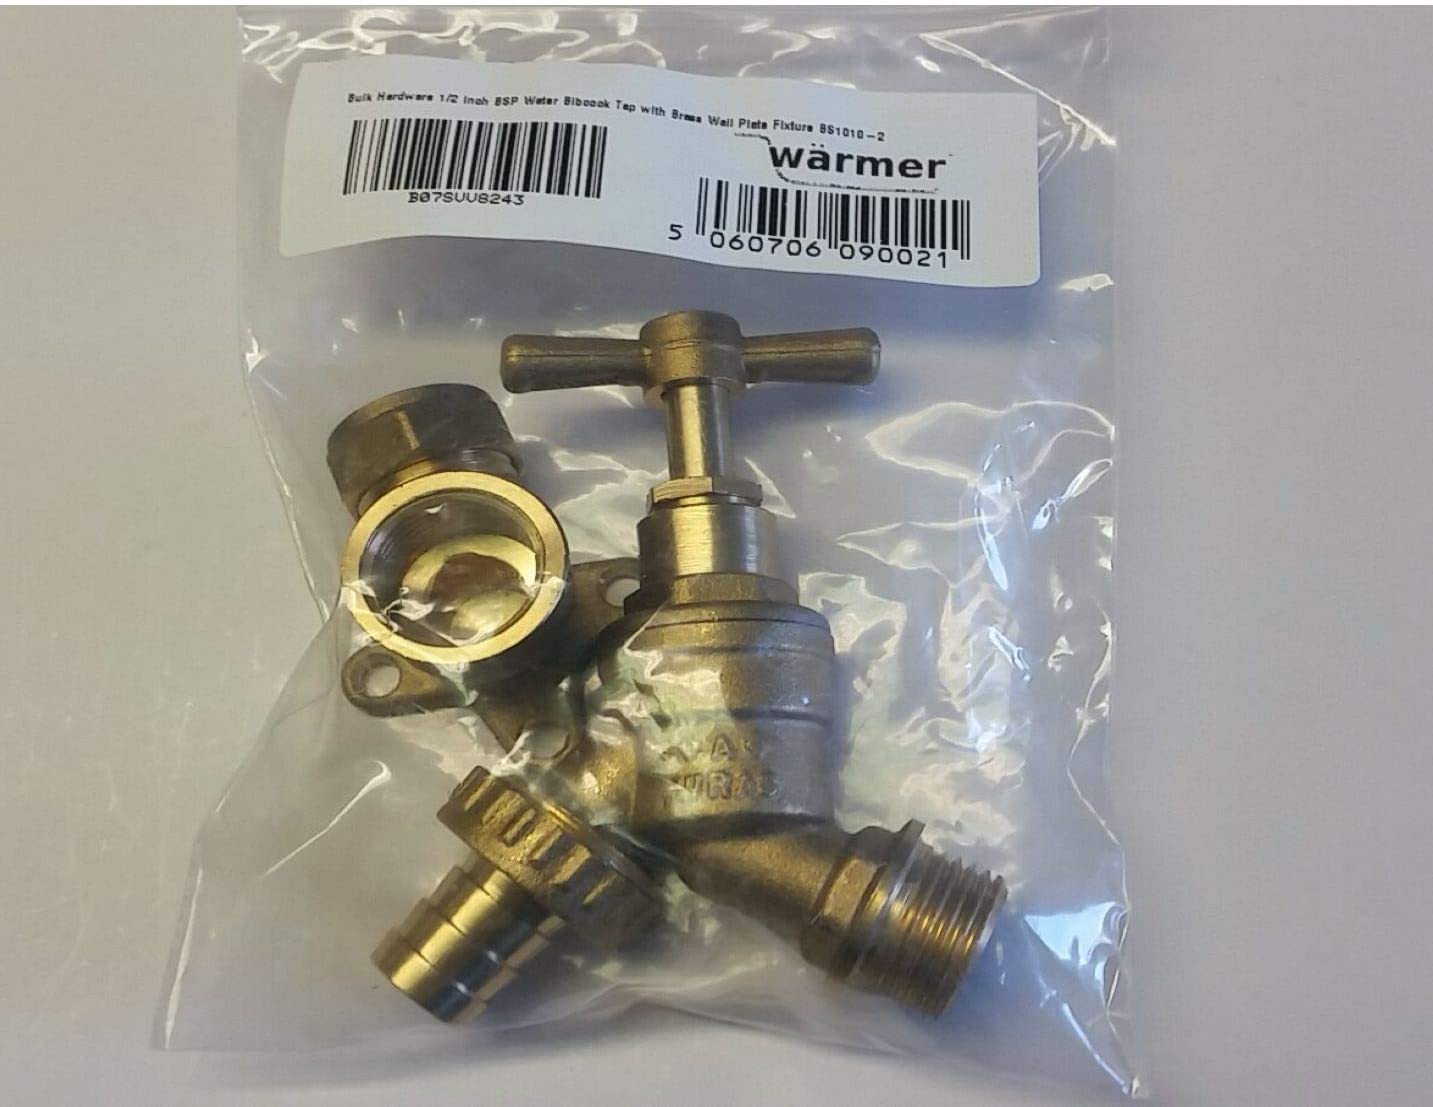 Water Bibcock Tap 1/2 Inch BSP With Brass Wall Plate Fixture Bs1010-2 for sale online 